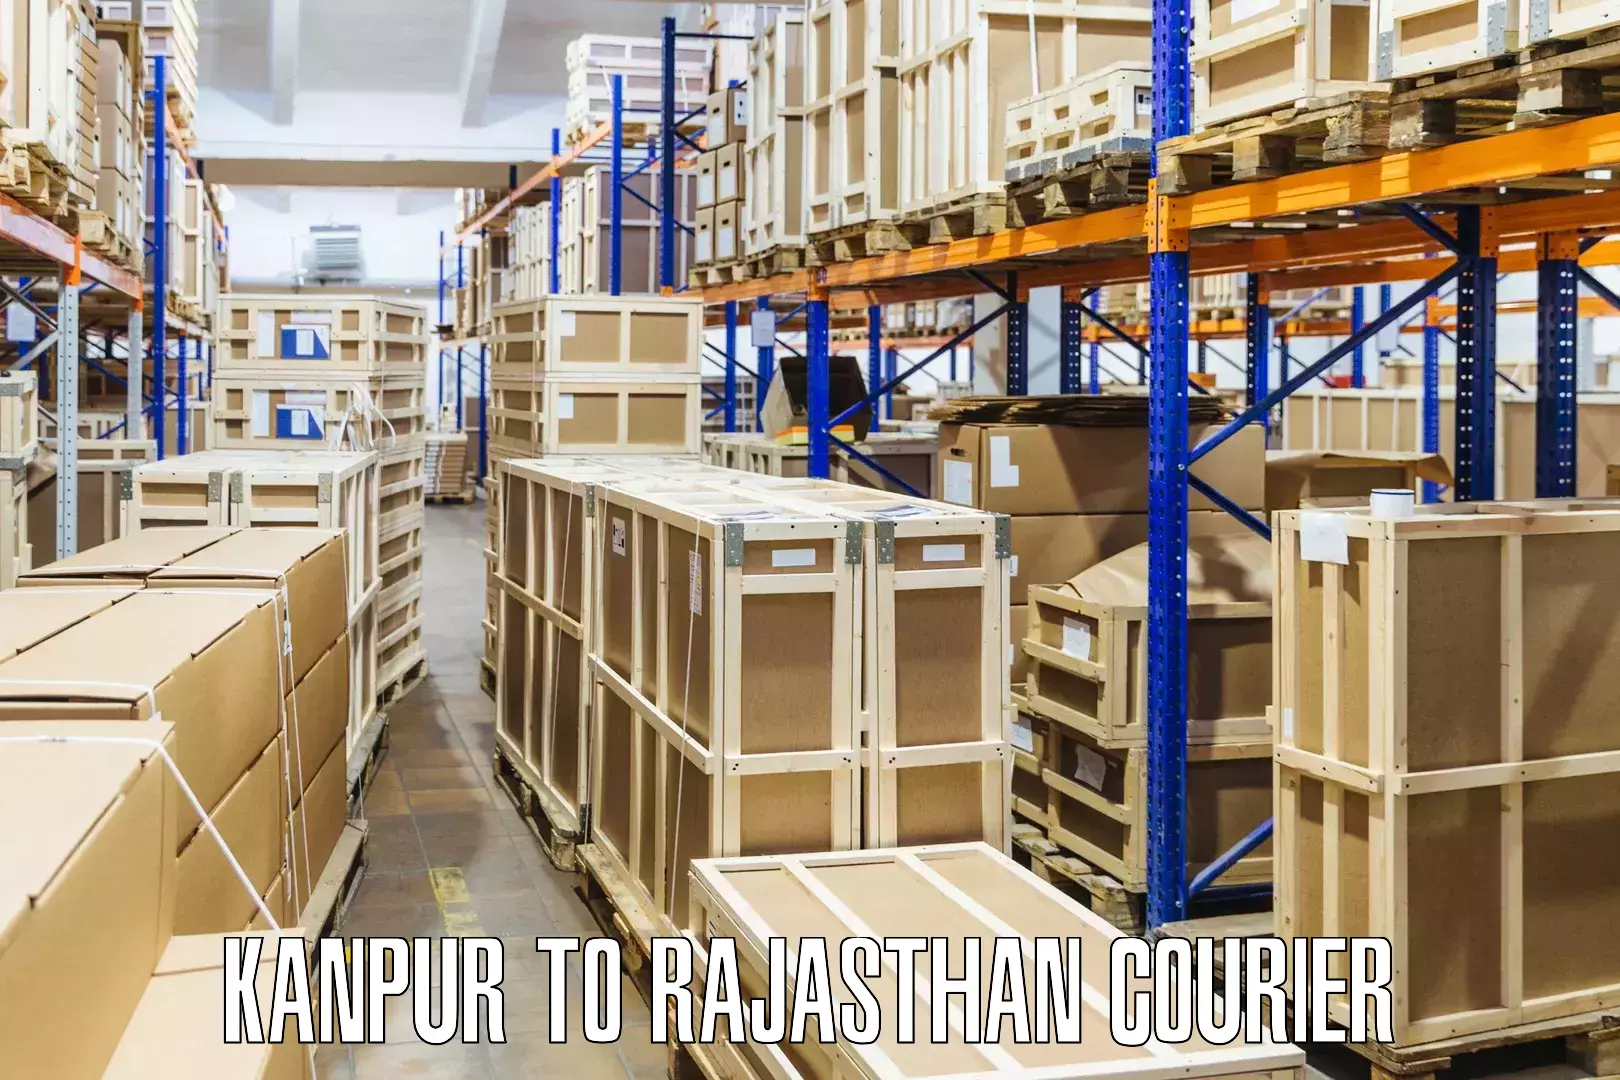 State-of-the-art courier technology Kanpur to Nadoti